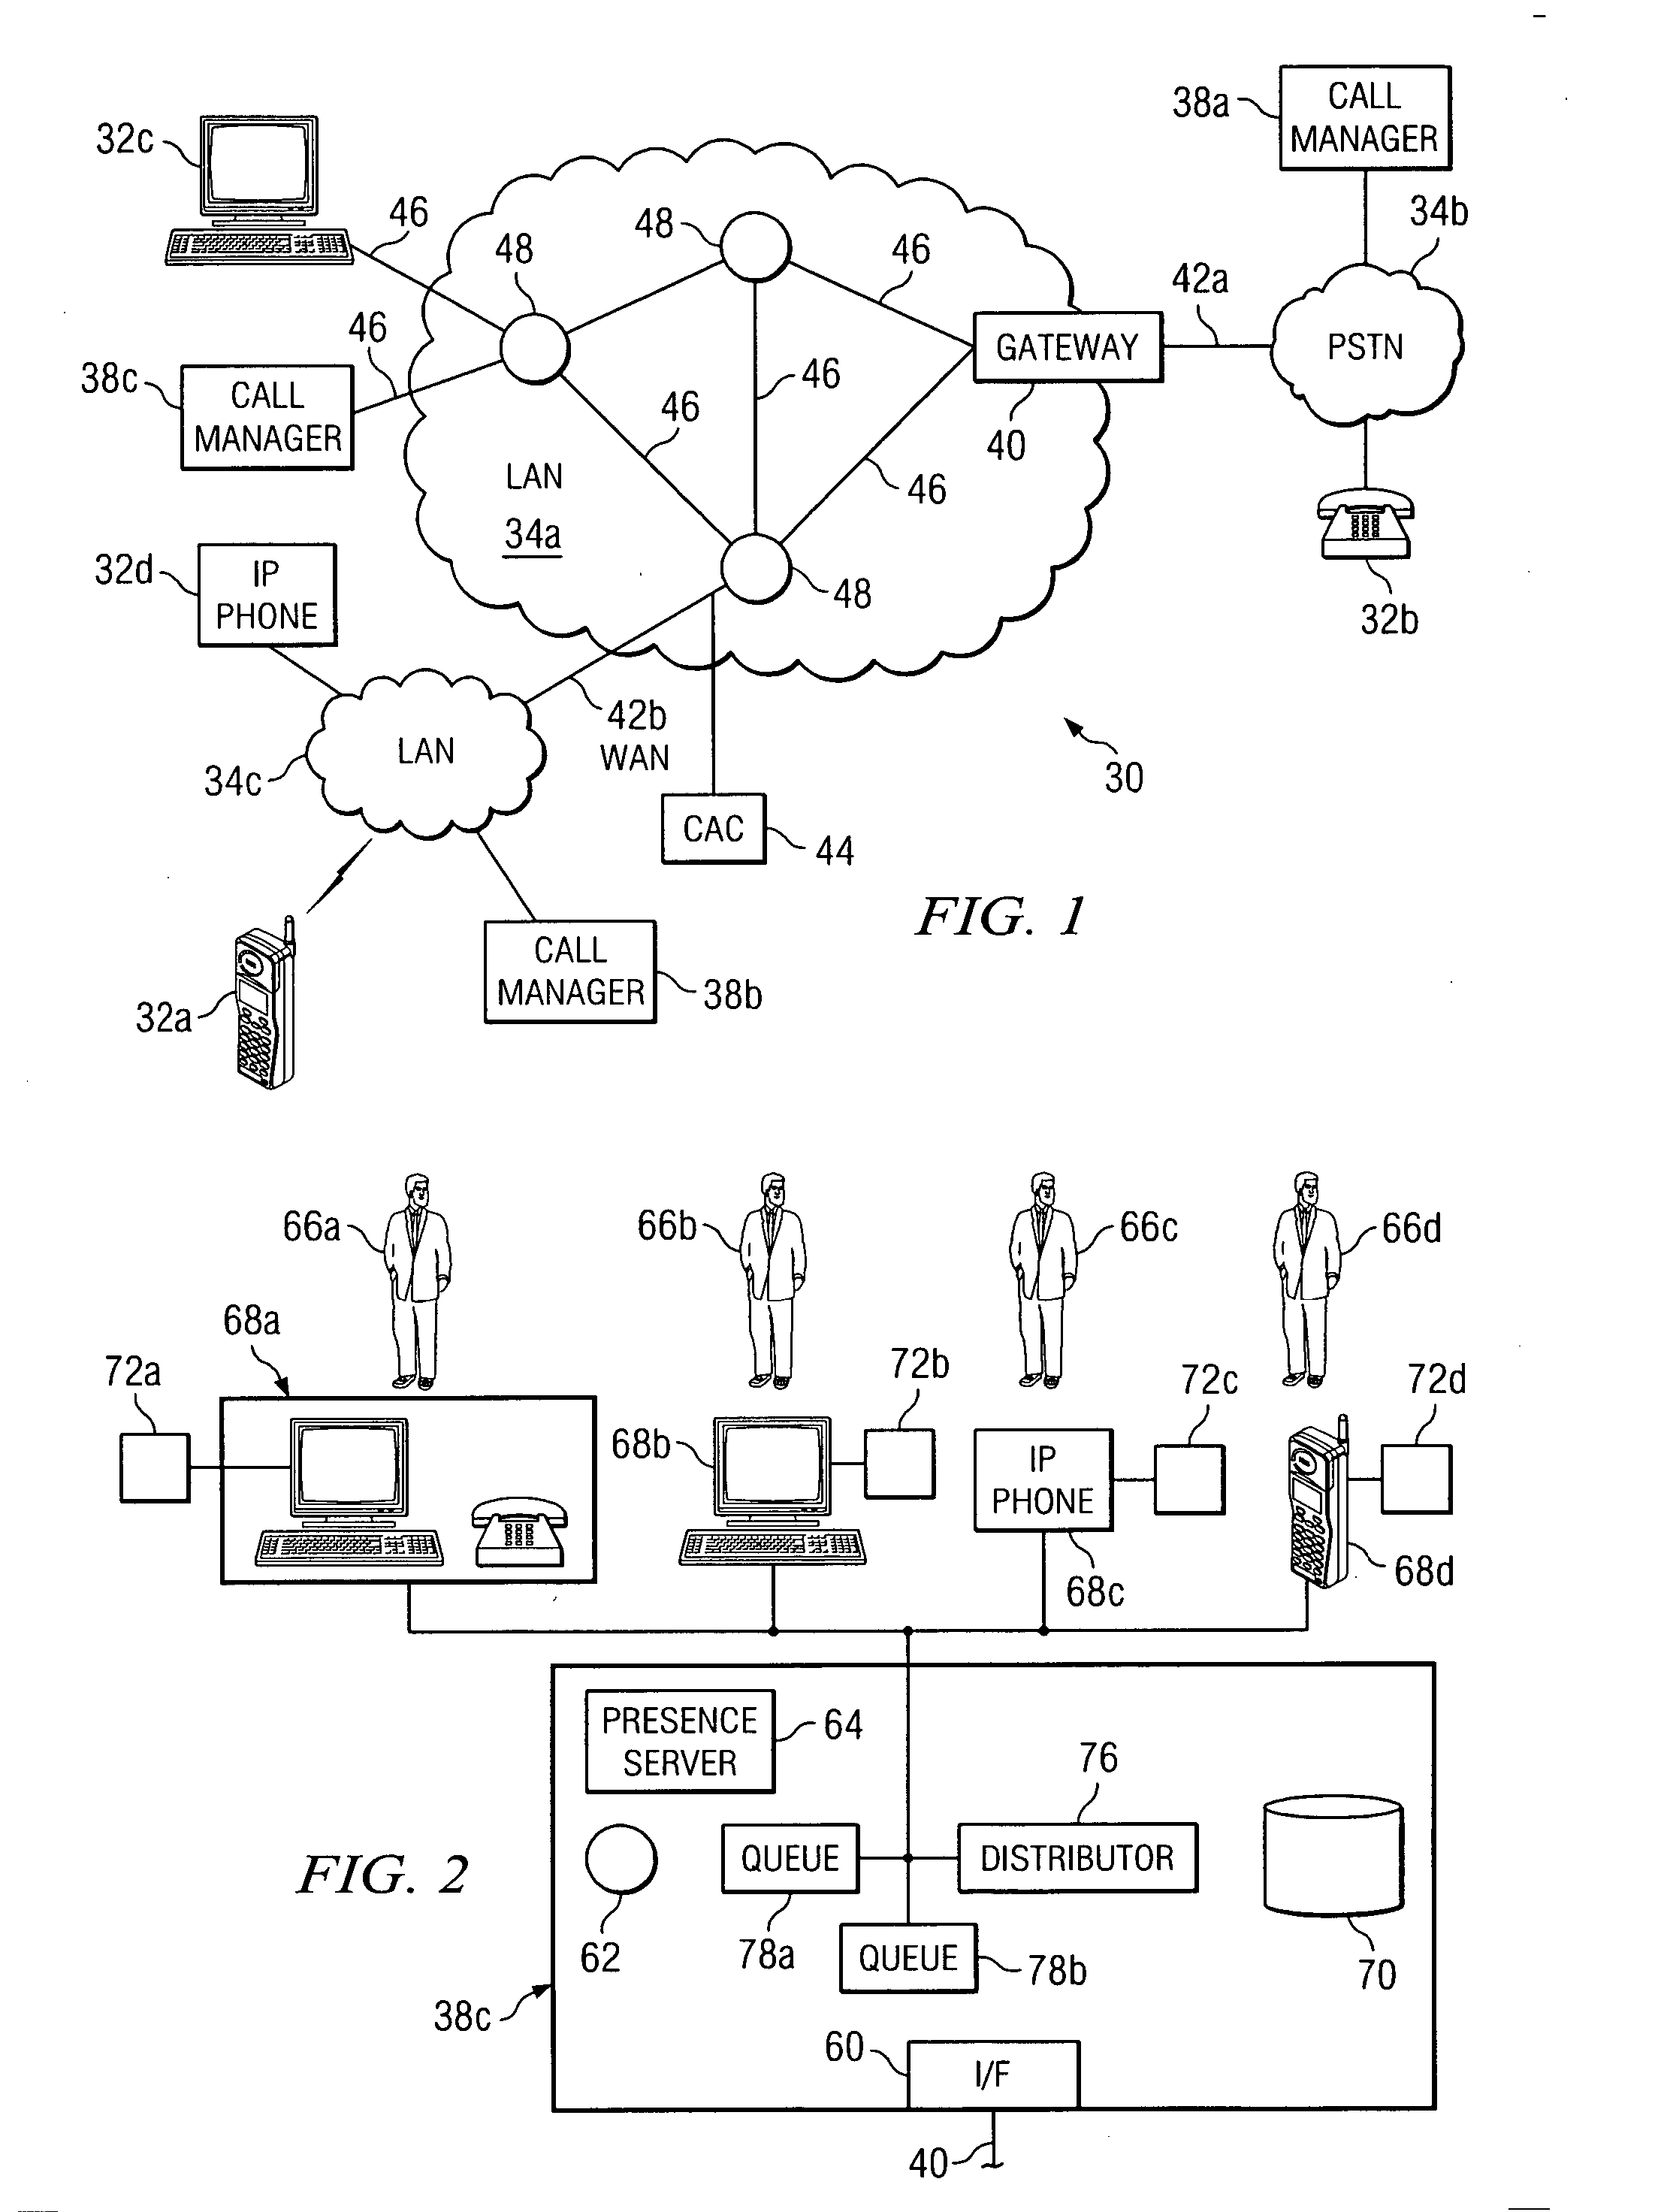 Method and system for the automated answering and holding of a call